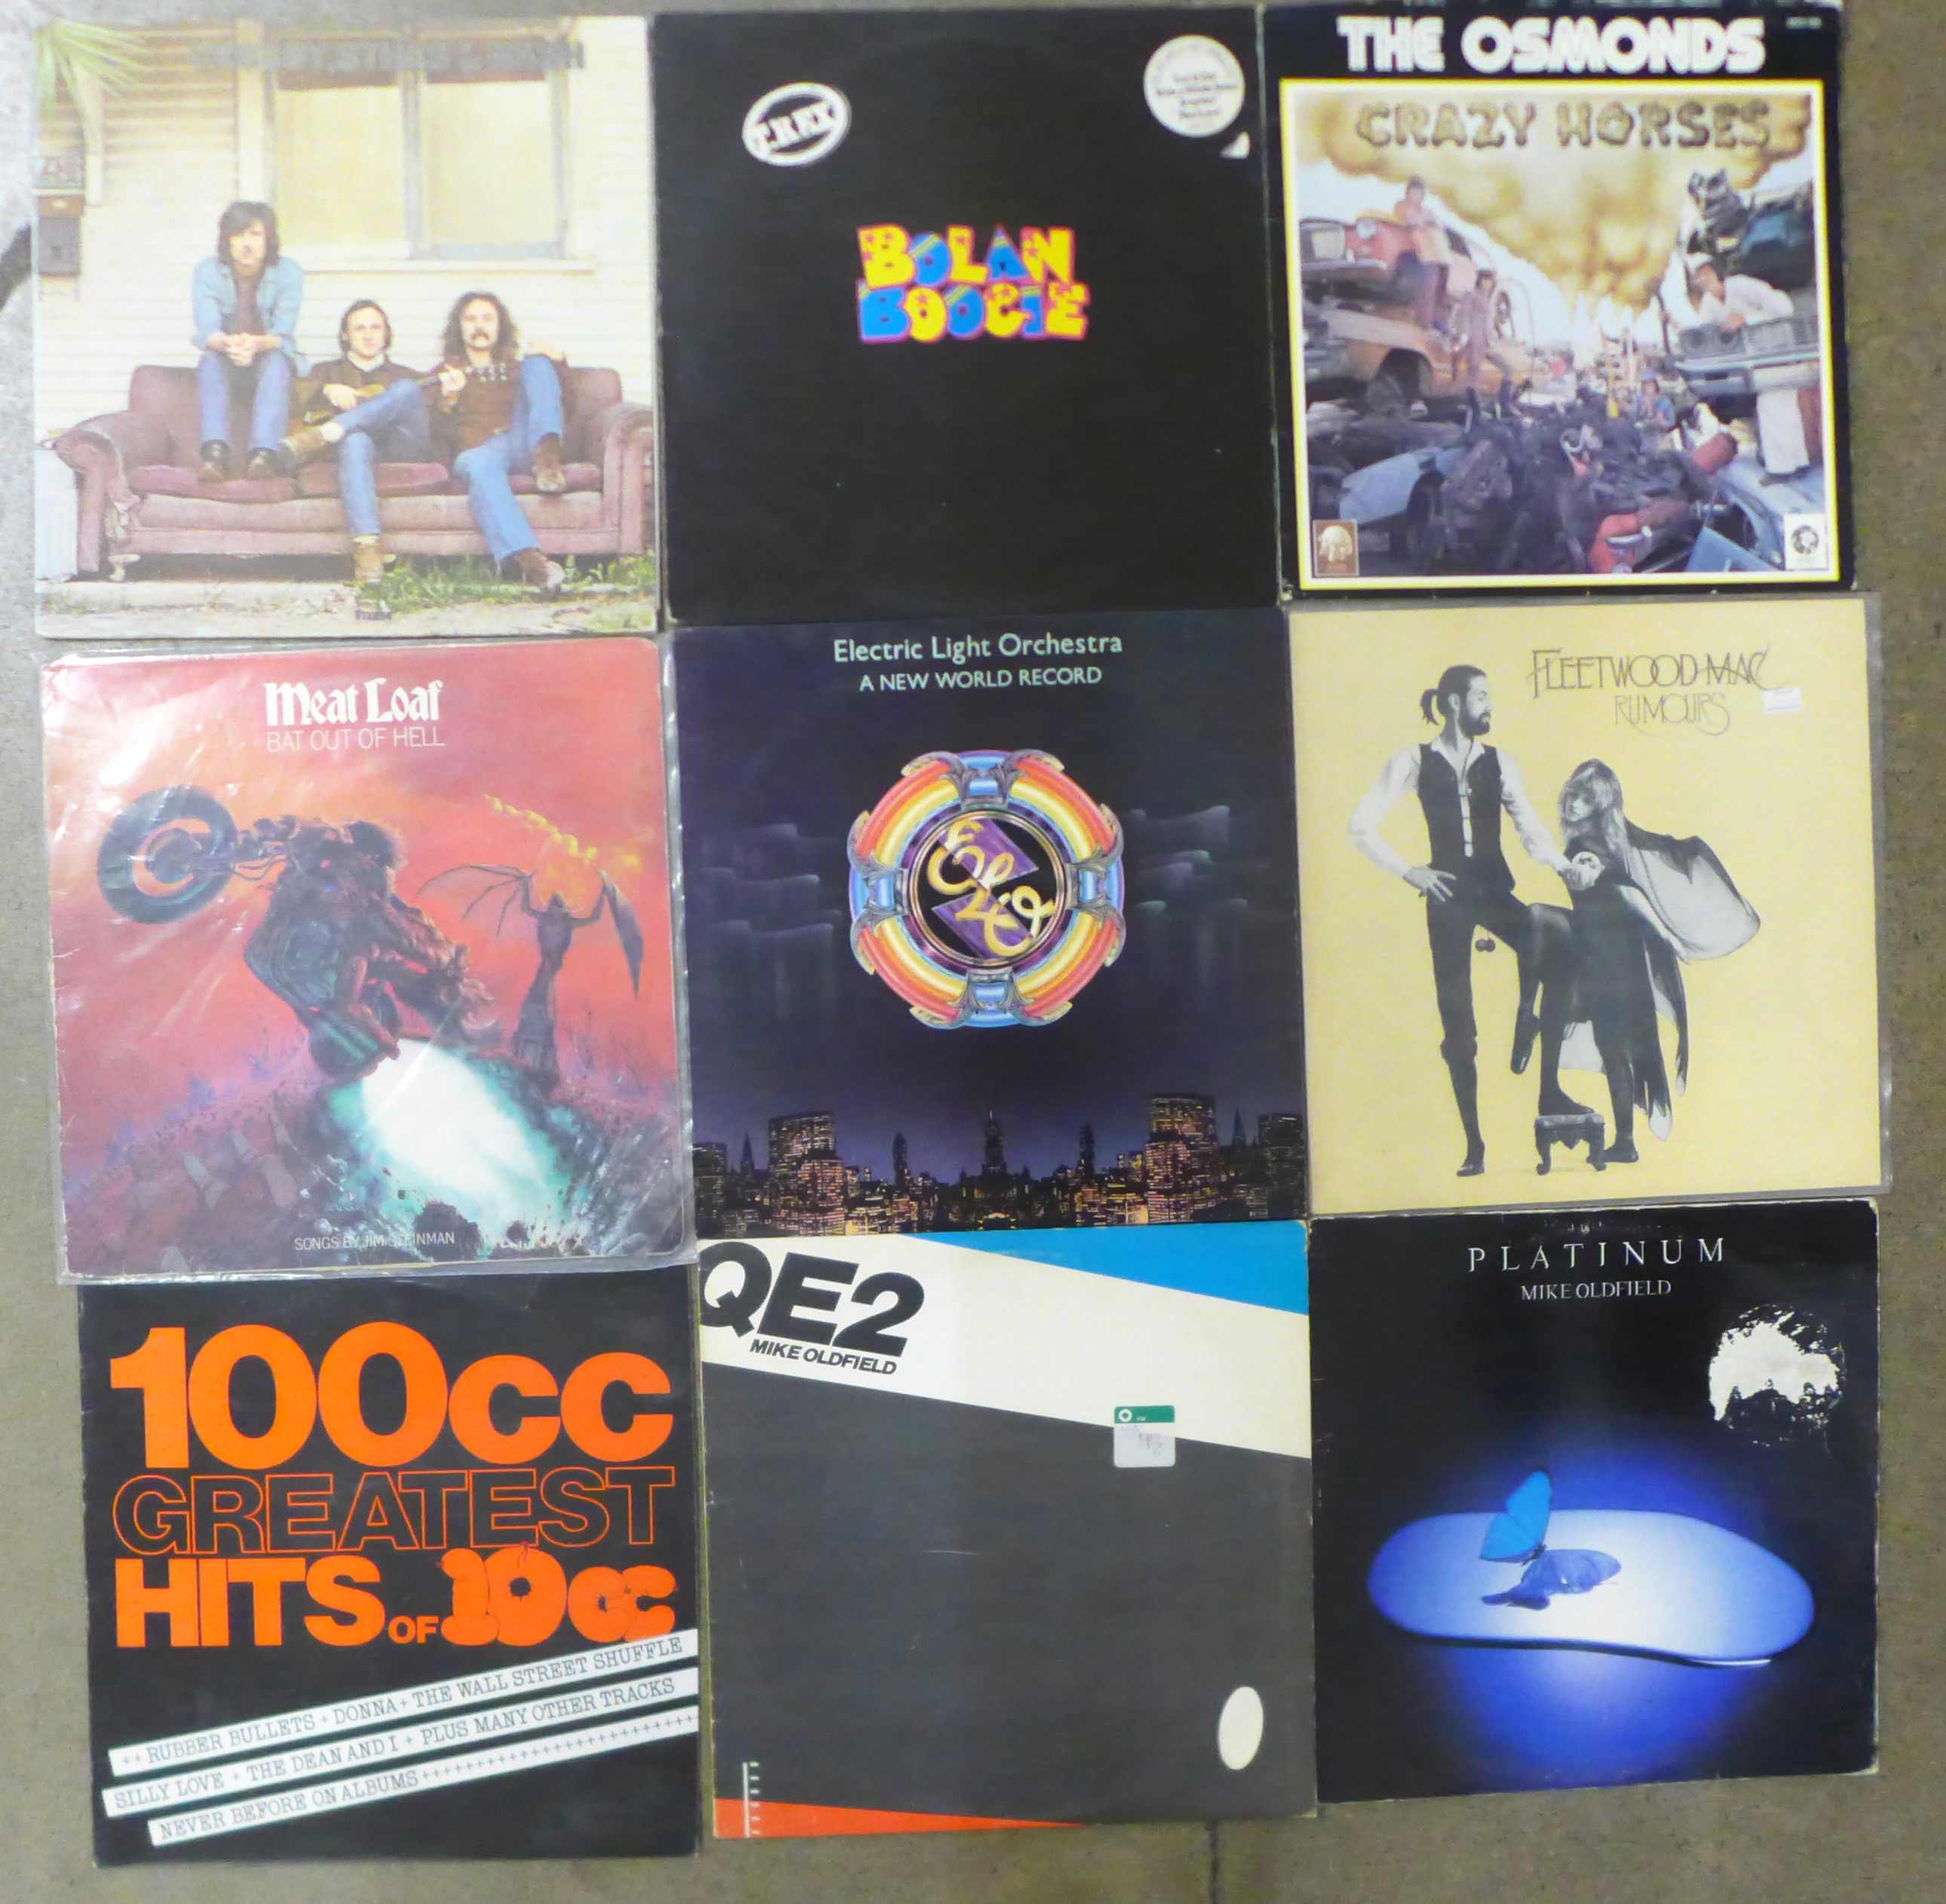 A collection of rock LP records, Queen, Meatloaf, Fleetwood Mac, Heart, Eagles, etc.